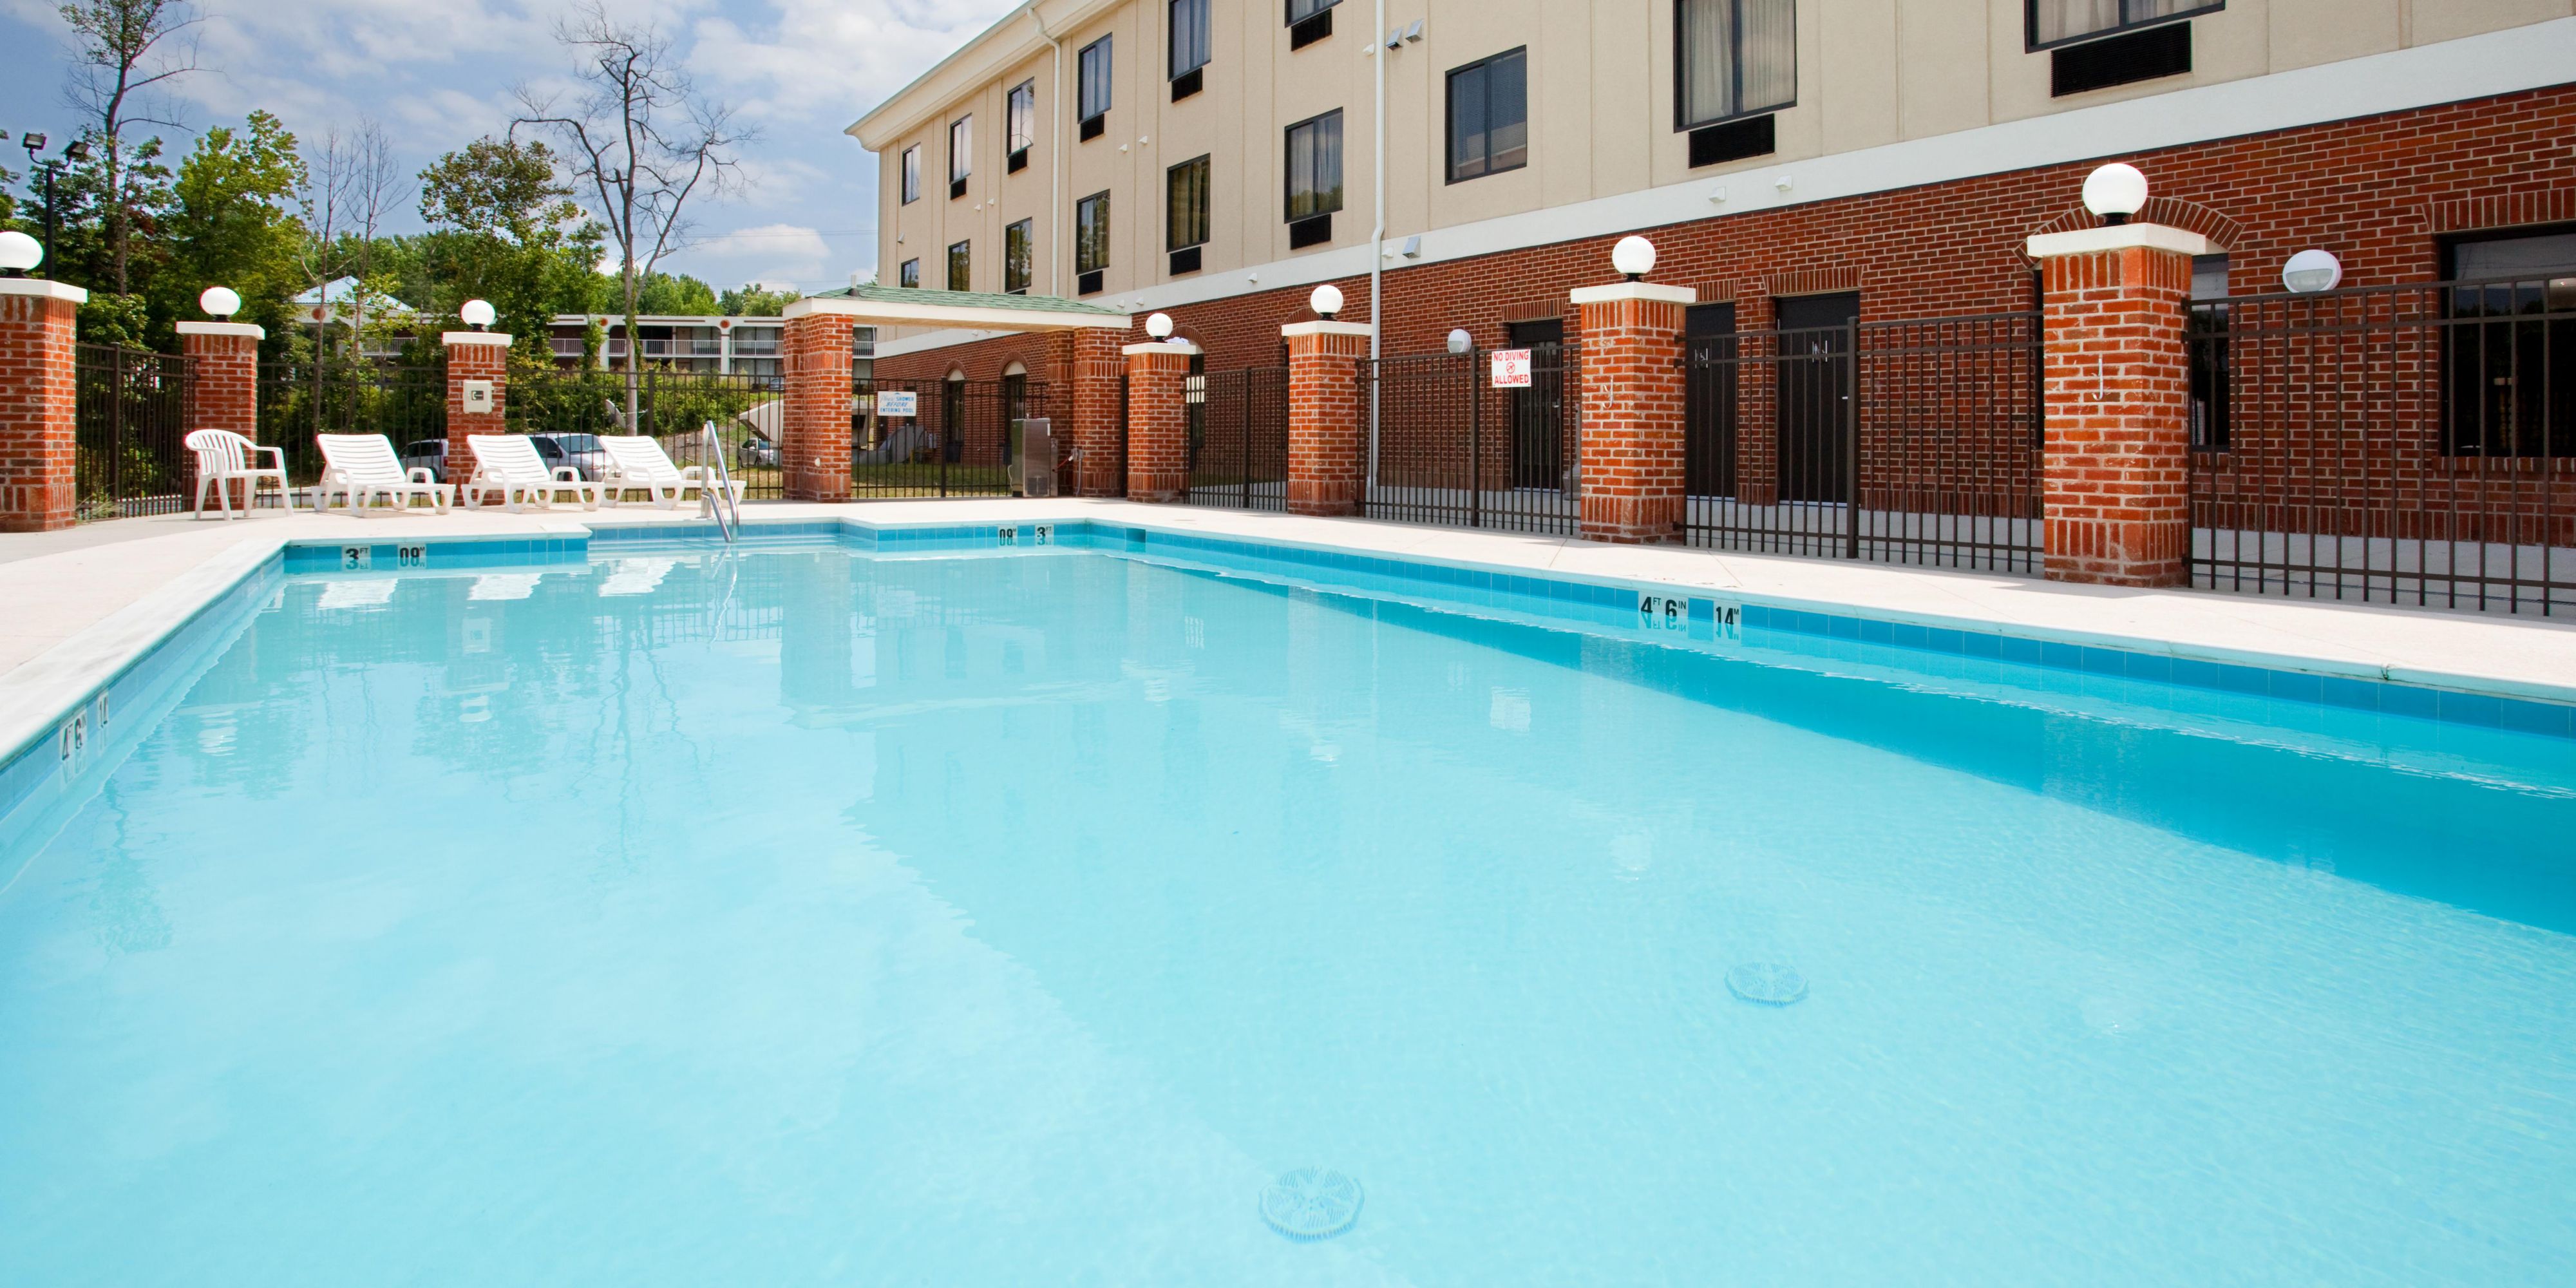 Life is better at the pool! Nothing like taking a dip to cool off and get in that summertime mood.